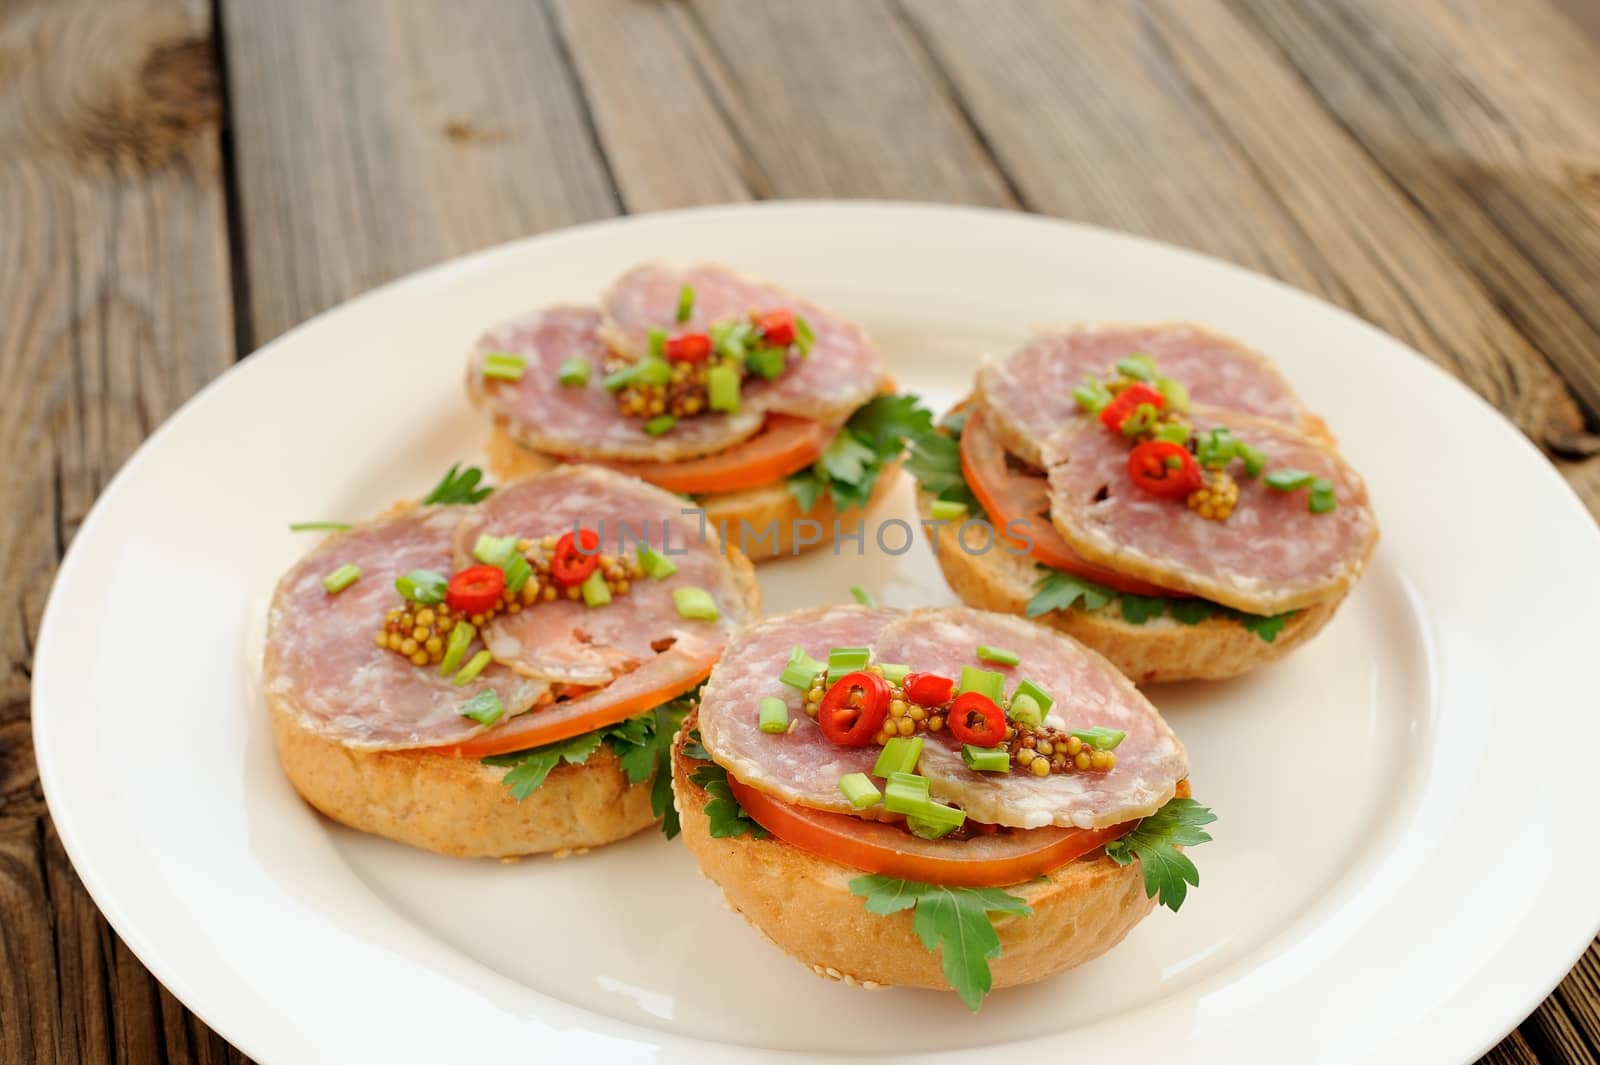 Ham sandwiches with chili, parsley and scallion on white plate by Borodin